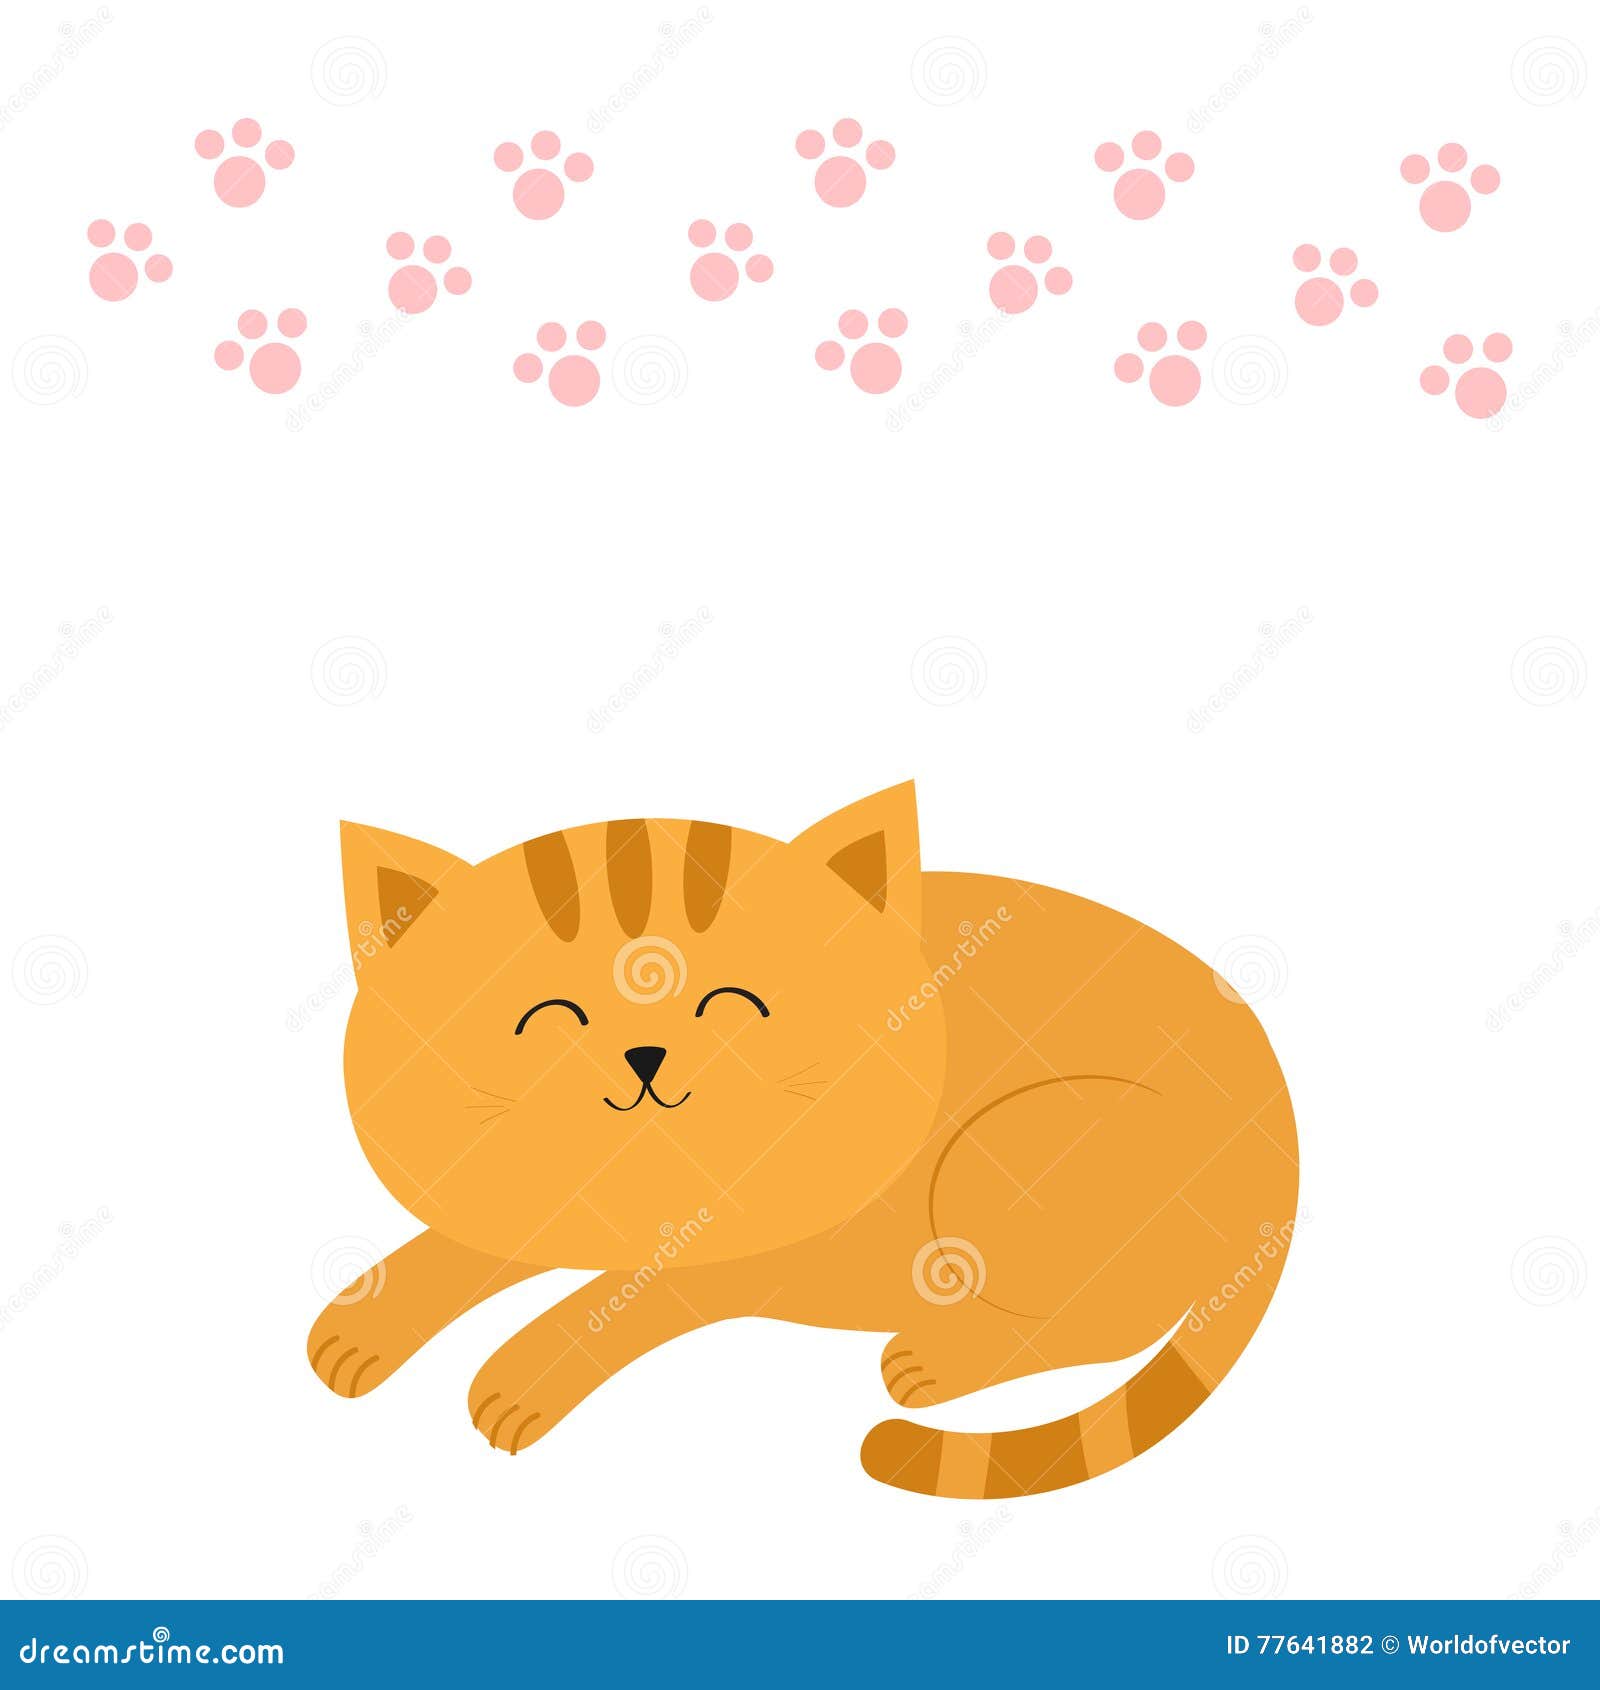 Cute Lying Sleeping Orange Cat With Moustache Whisker Funny Cartoon Character Pink Animal Paw Print White Background Stock Vector Illustration Of Animal Line